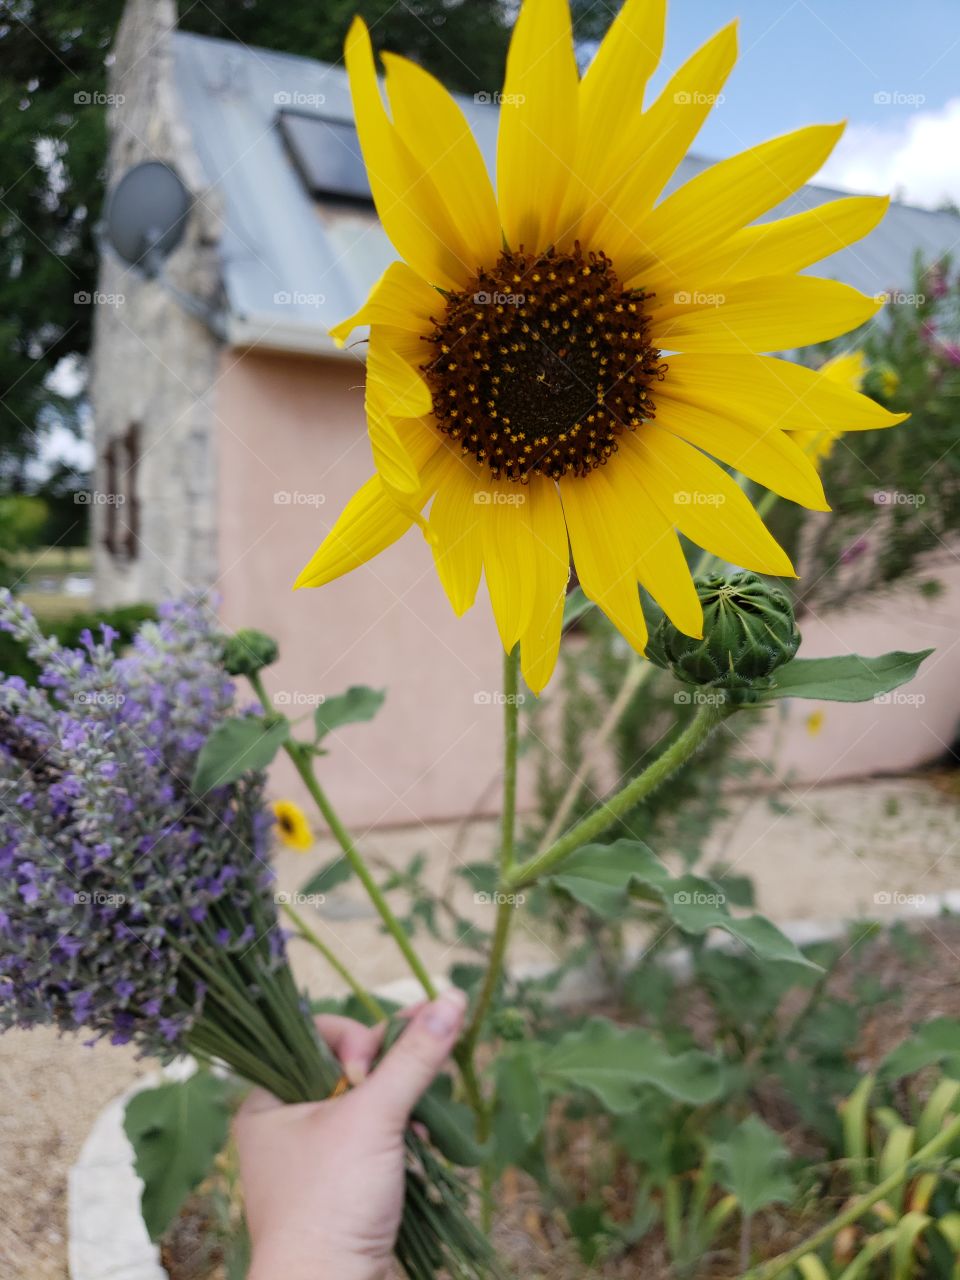 Sunflower and someone holding a bunch of lavender